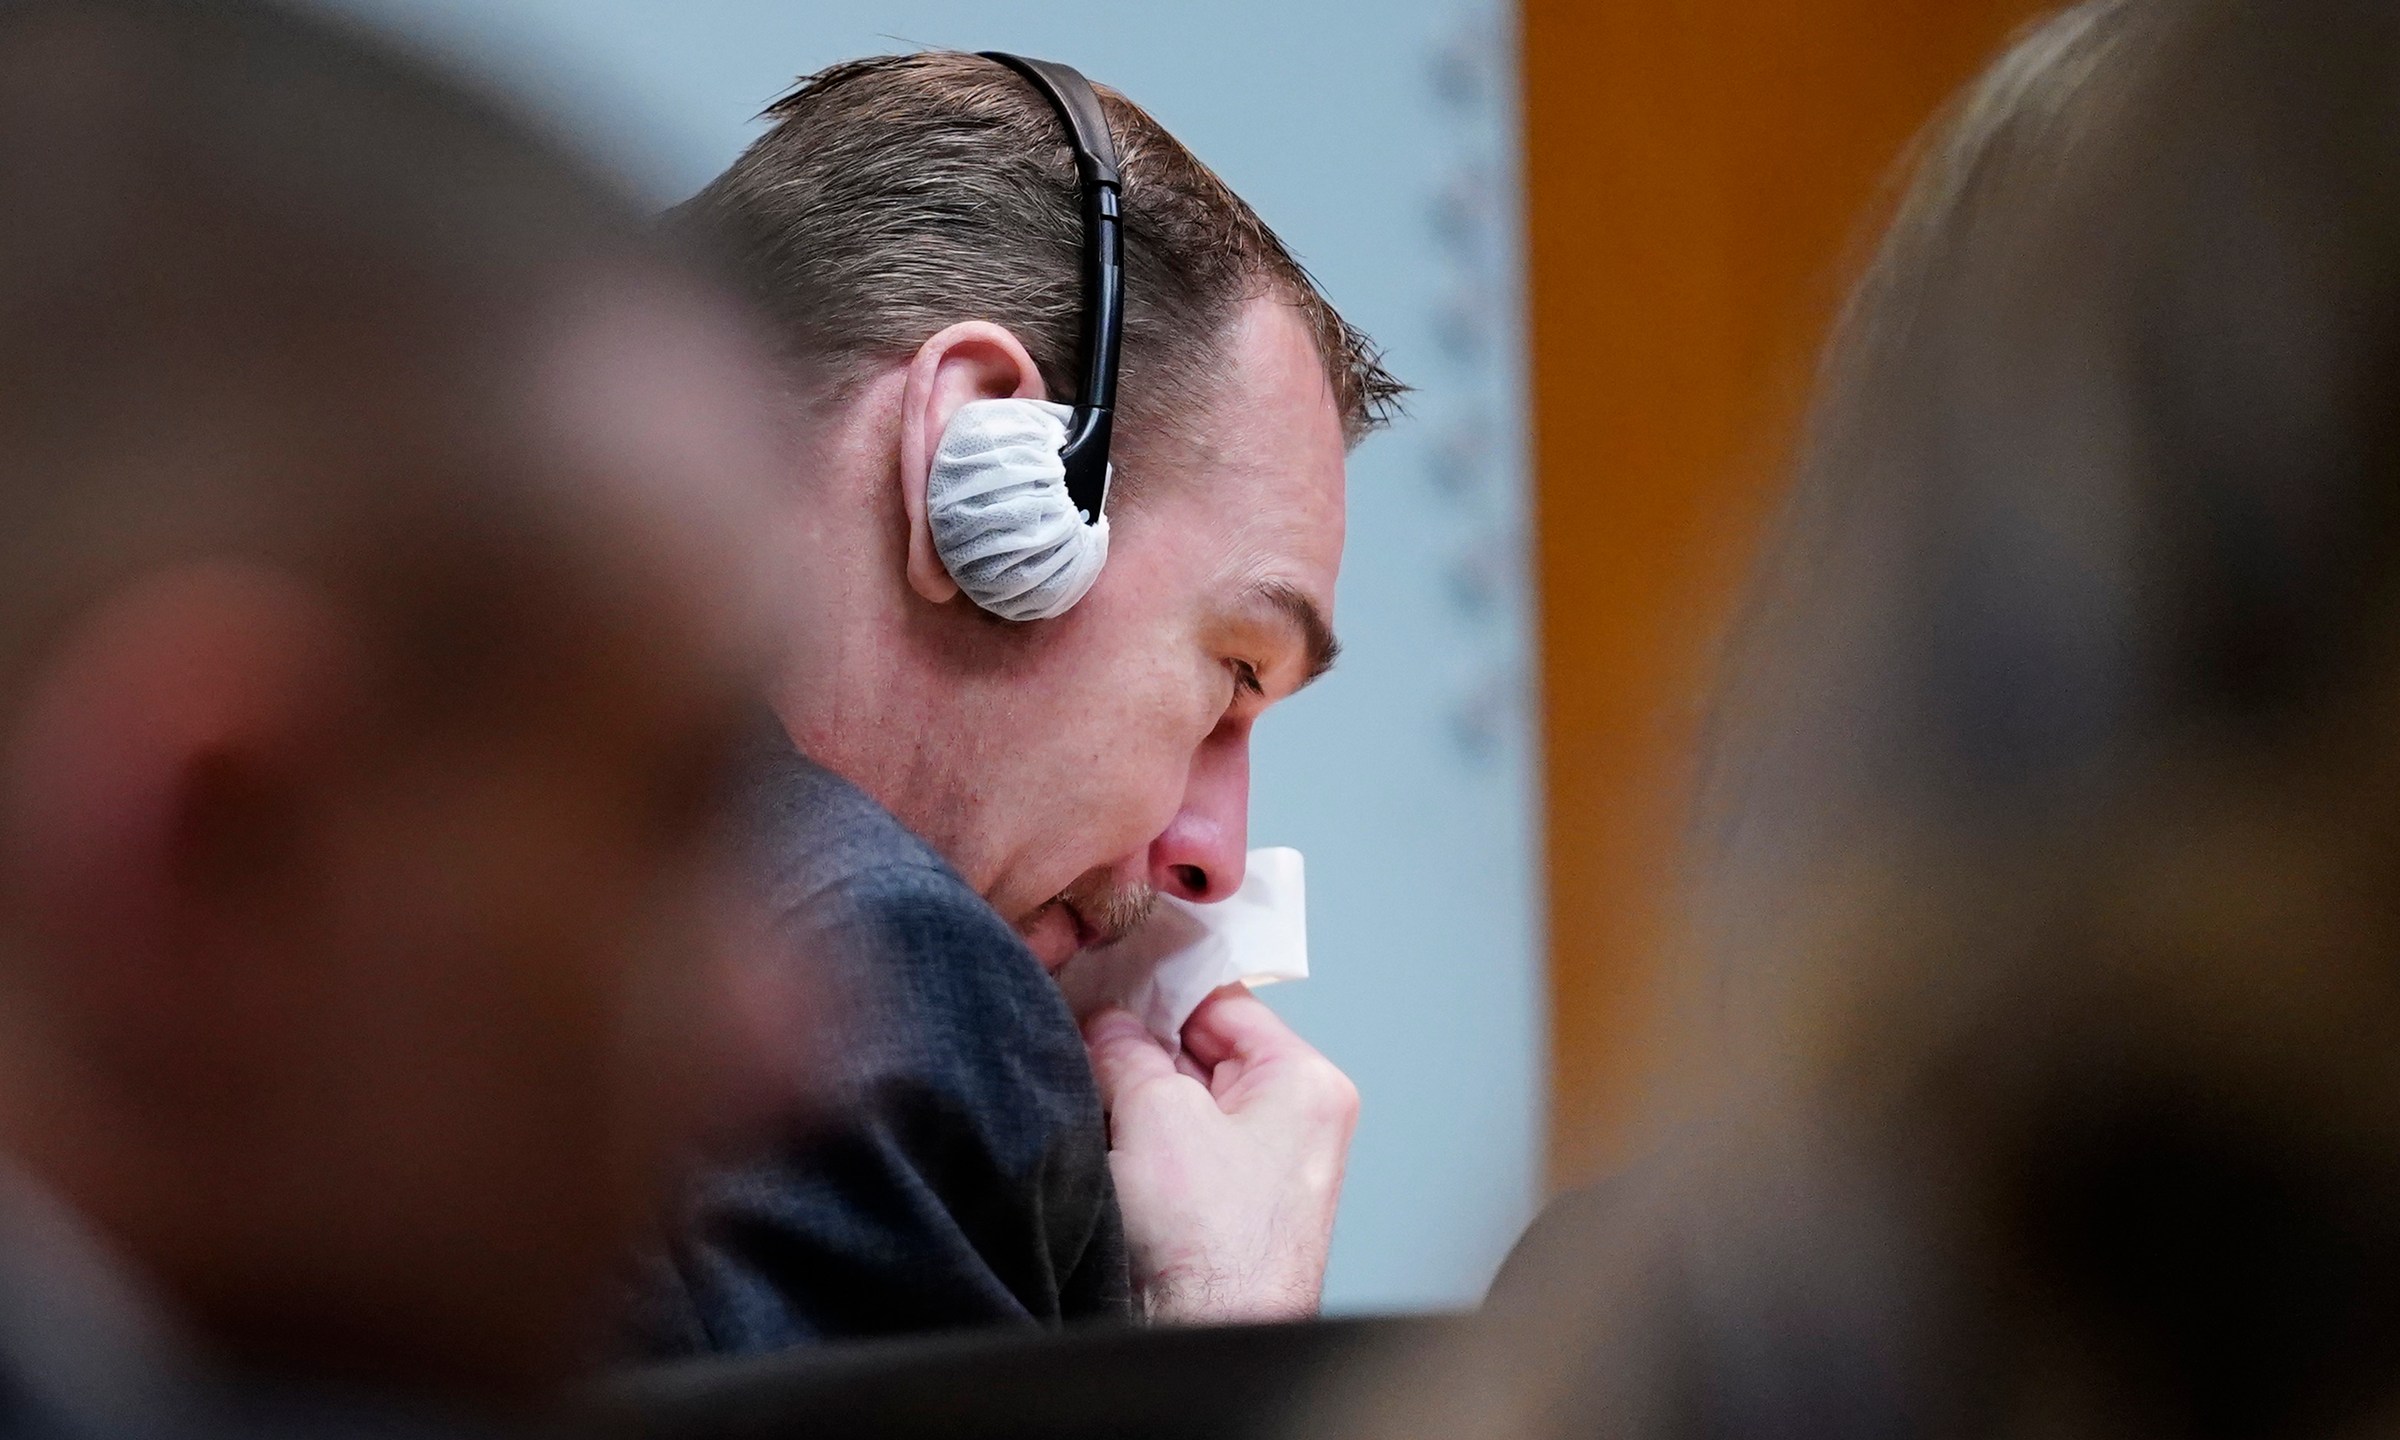 James Crumbley becomes emotional during the testimony of Oxford High School educator Molly Darnell as he sits with his attorney Mariell Lehman on Thursday, March. 7, 2024 in Pontiac, Mich. James Crumbley, 47, is charged with four counts of involuntary manslaughter, one for each teenager killed by Ethan Crumbley at Oxford High School in 2021. (Mandi Wright/Detroit Free Press via AP, Pool)